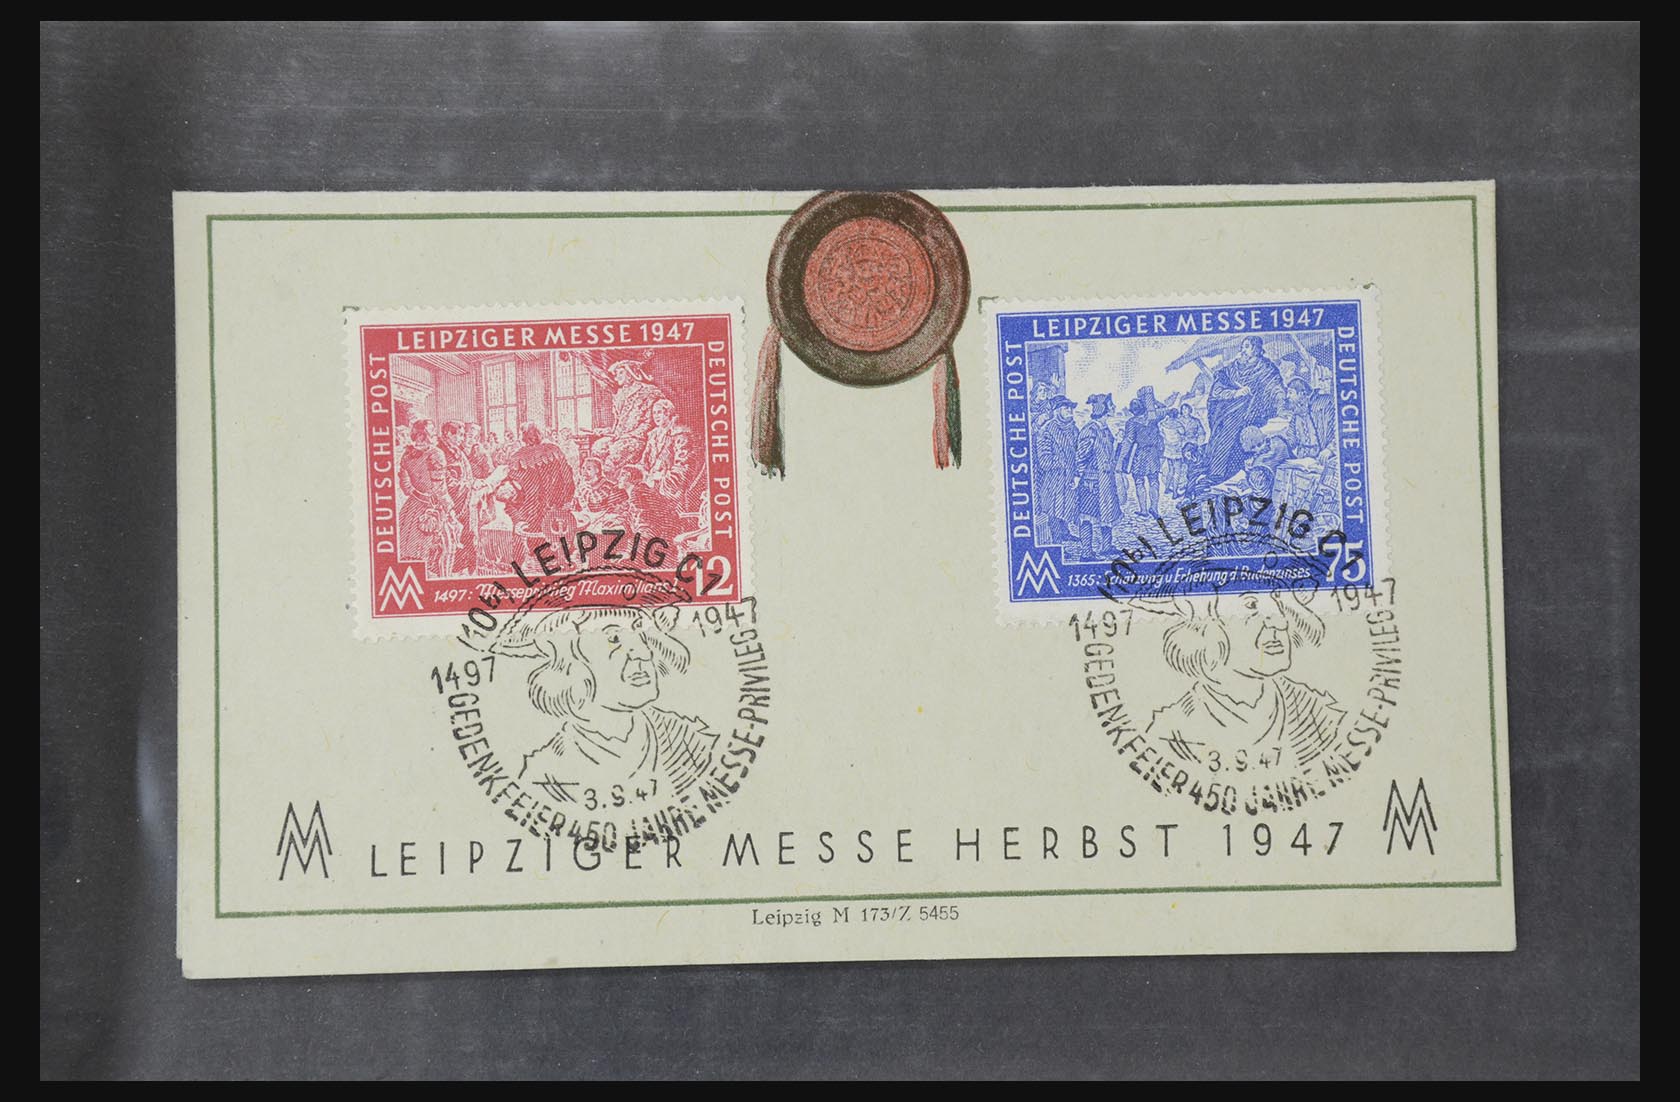 31581 002 - 31581 Germany covers and FDC's 1945-1981.